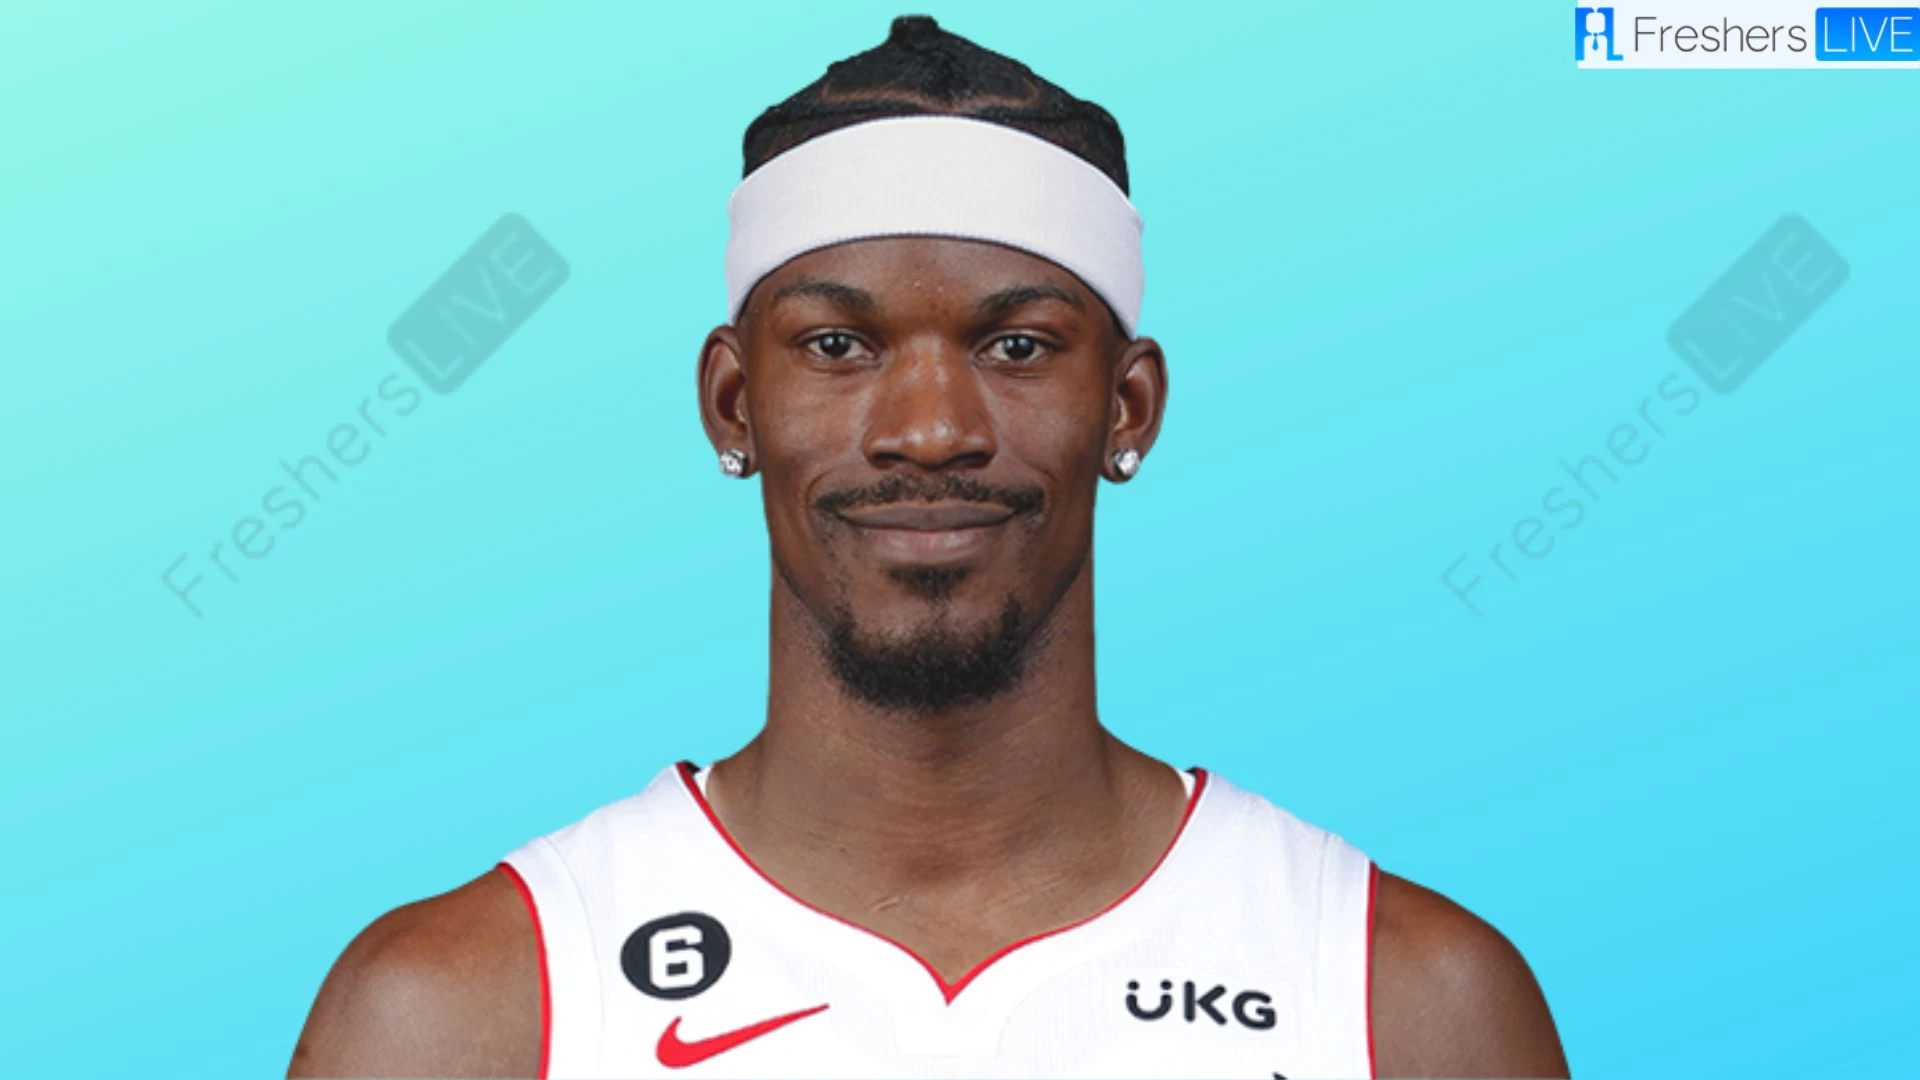 Jimmy Butler Ethnicity, What is Jimmy Butler's Ethnicity?